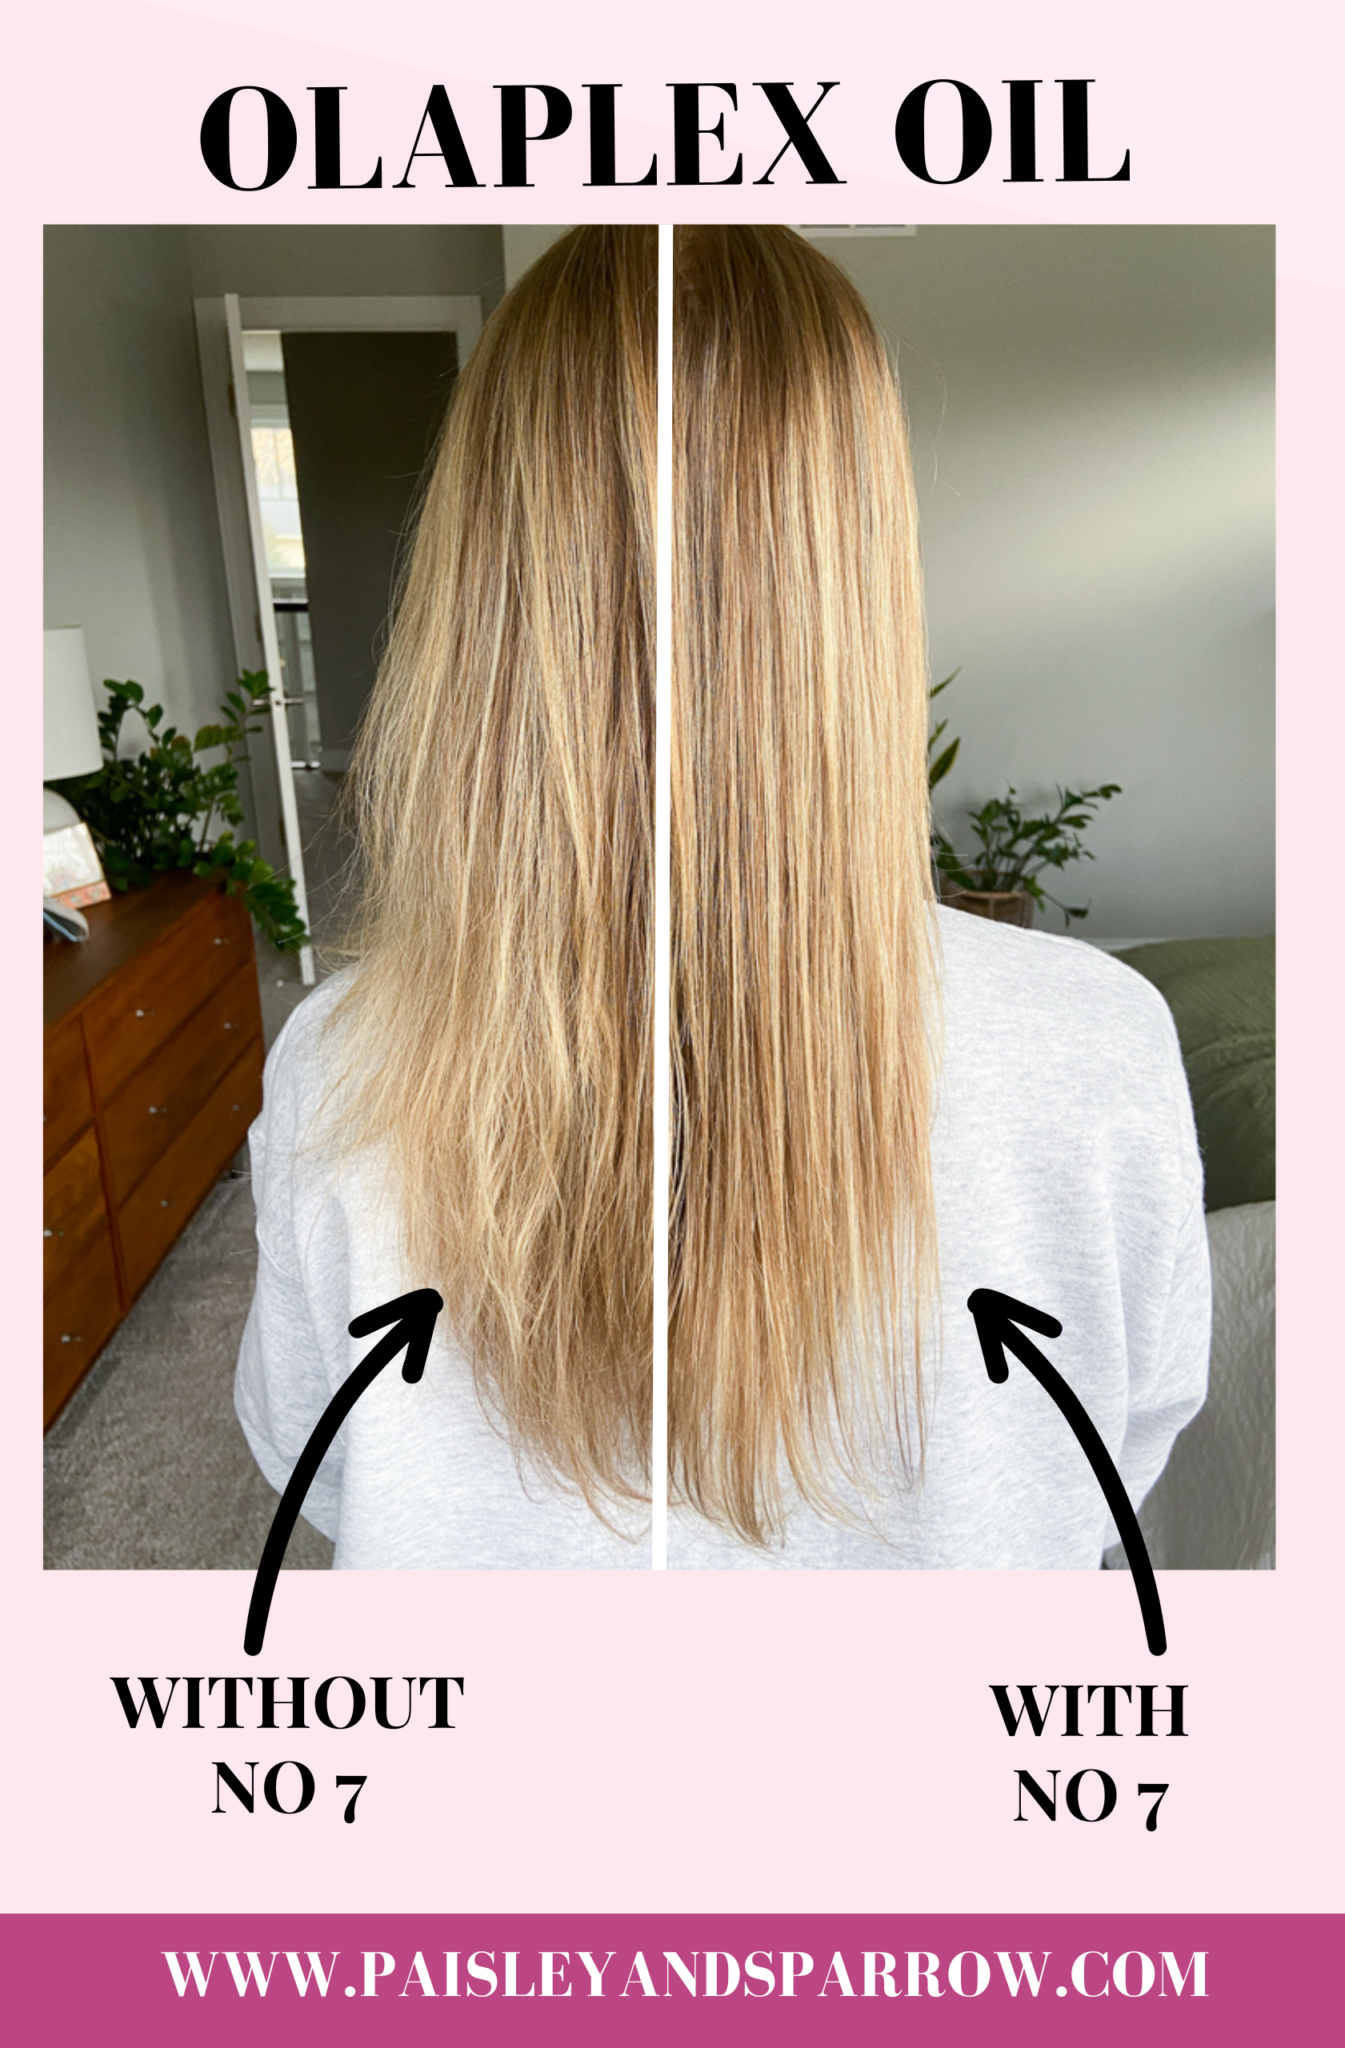 olaplex hair oil before and after